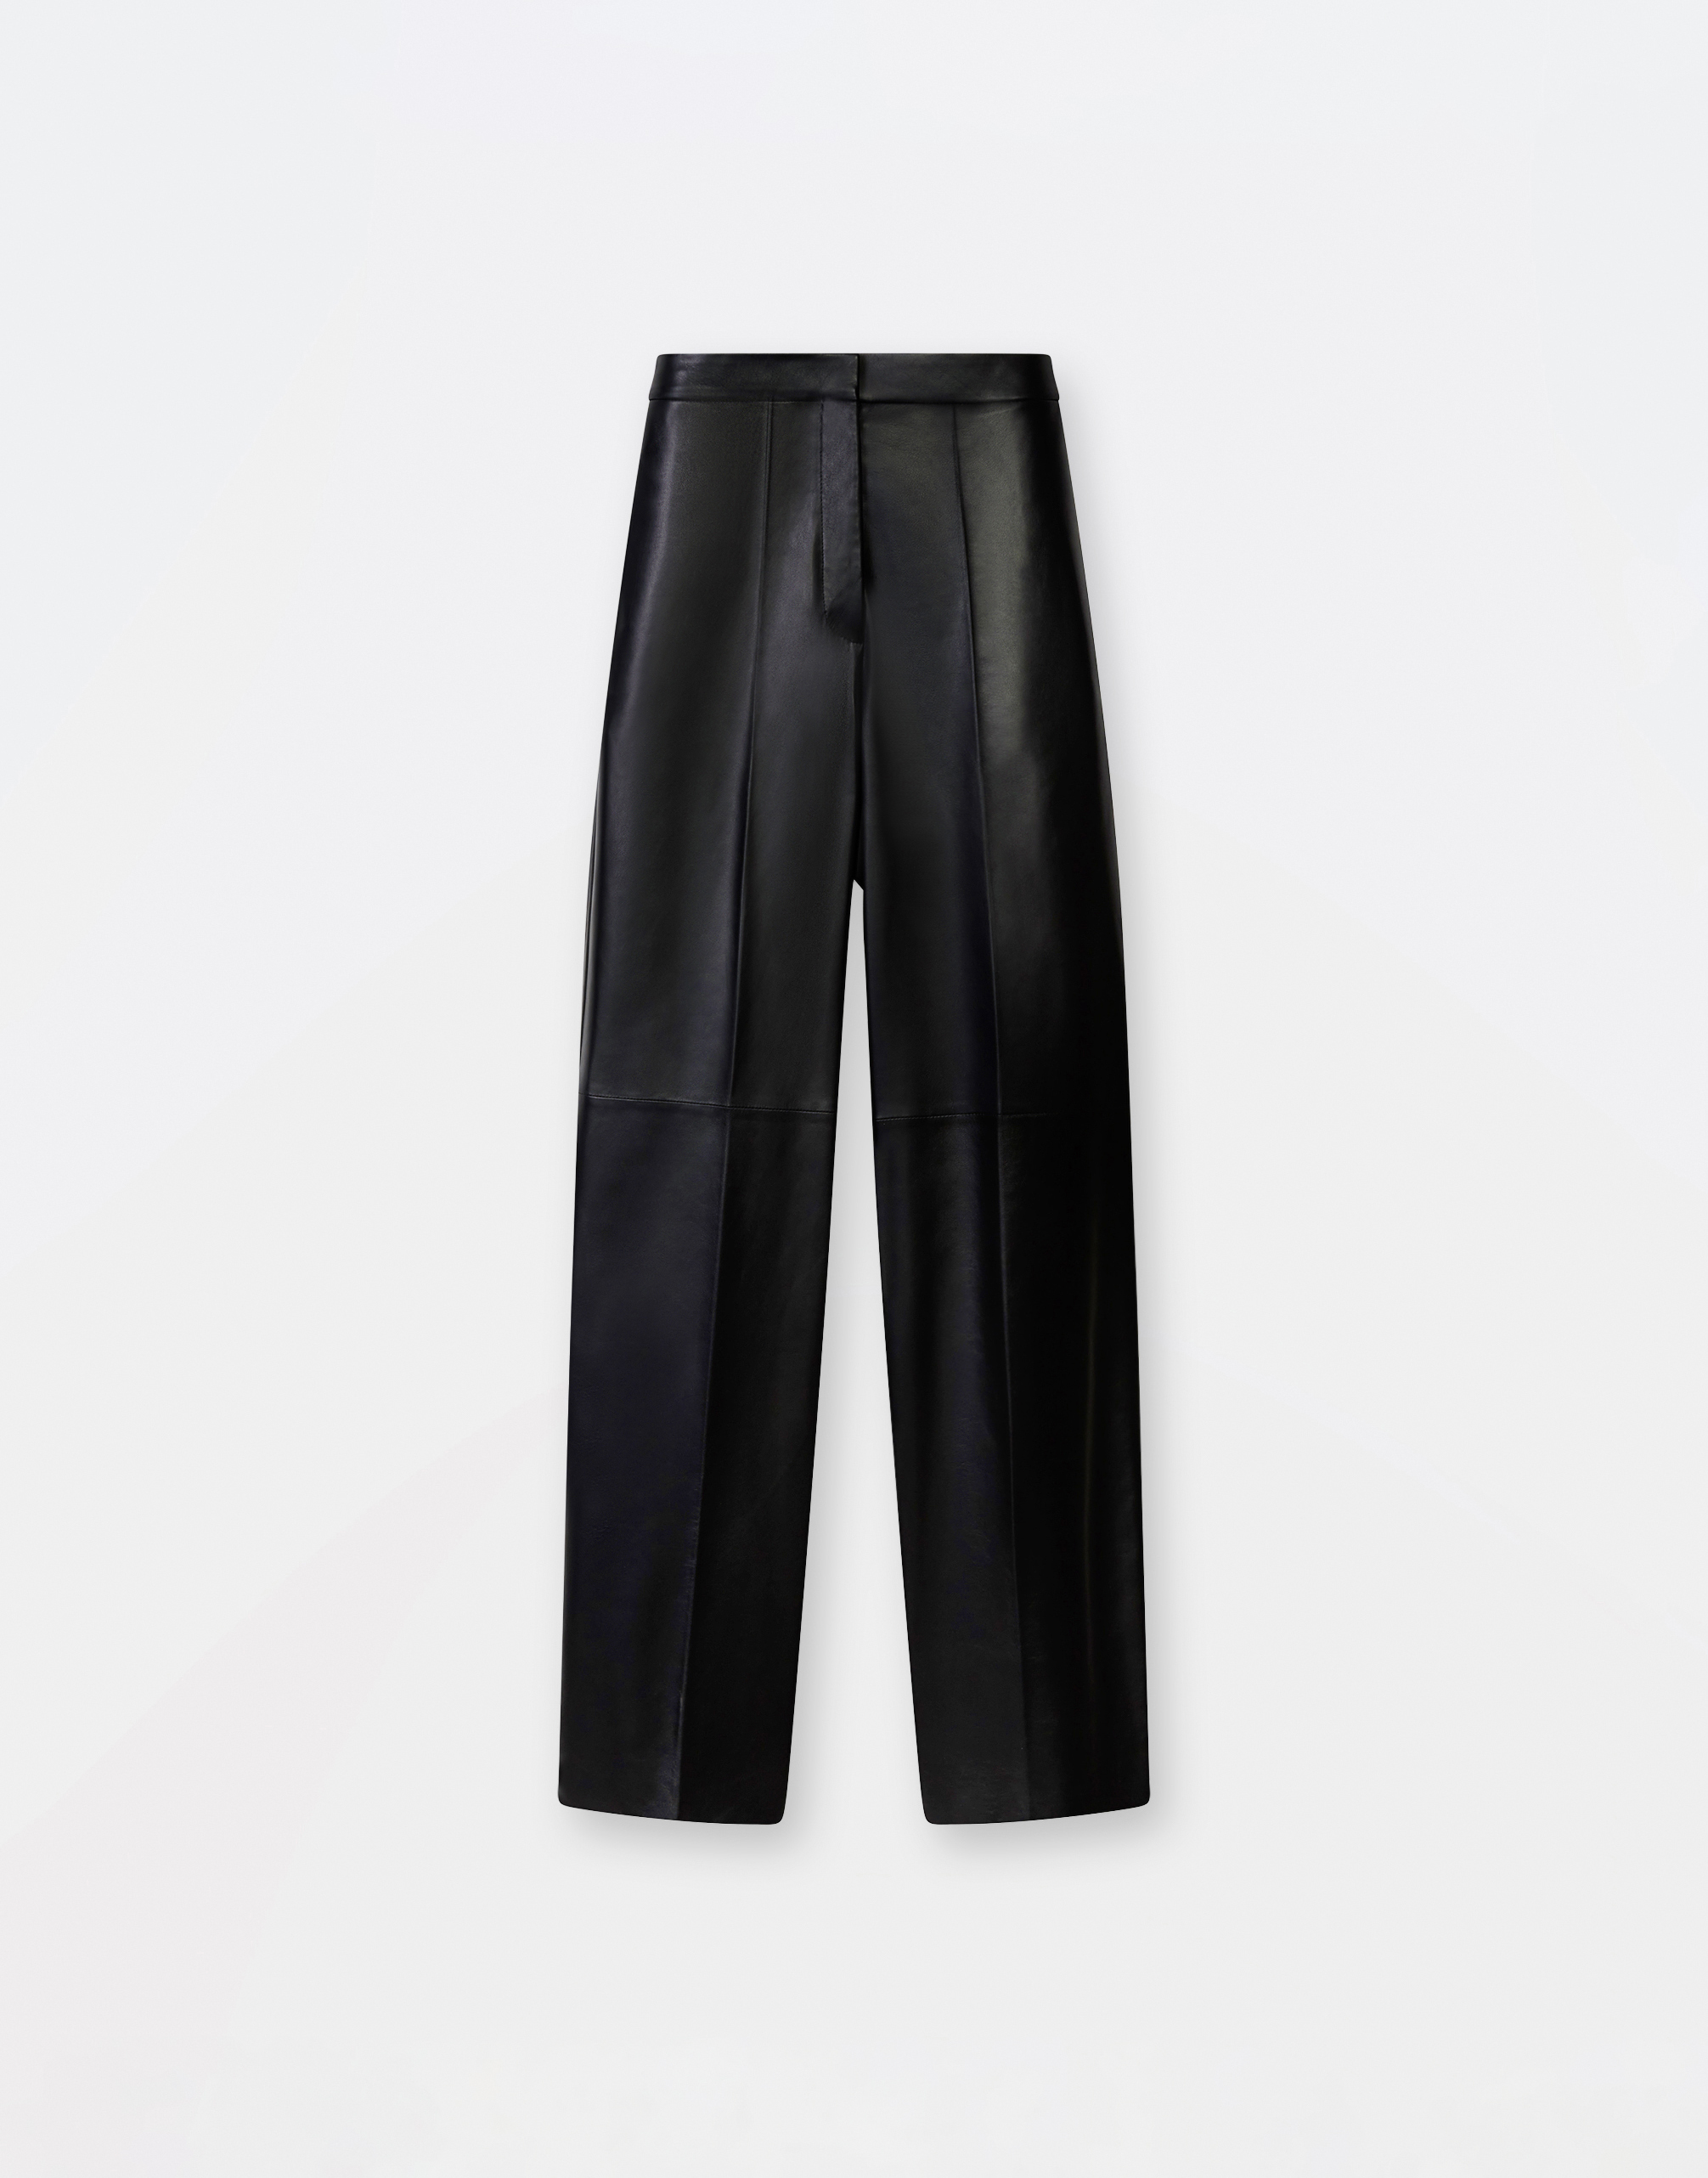 Nappa leather trousers, black Pants for Women